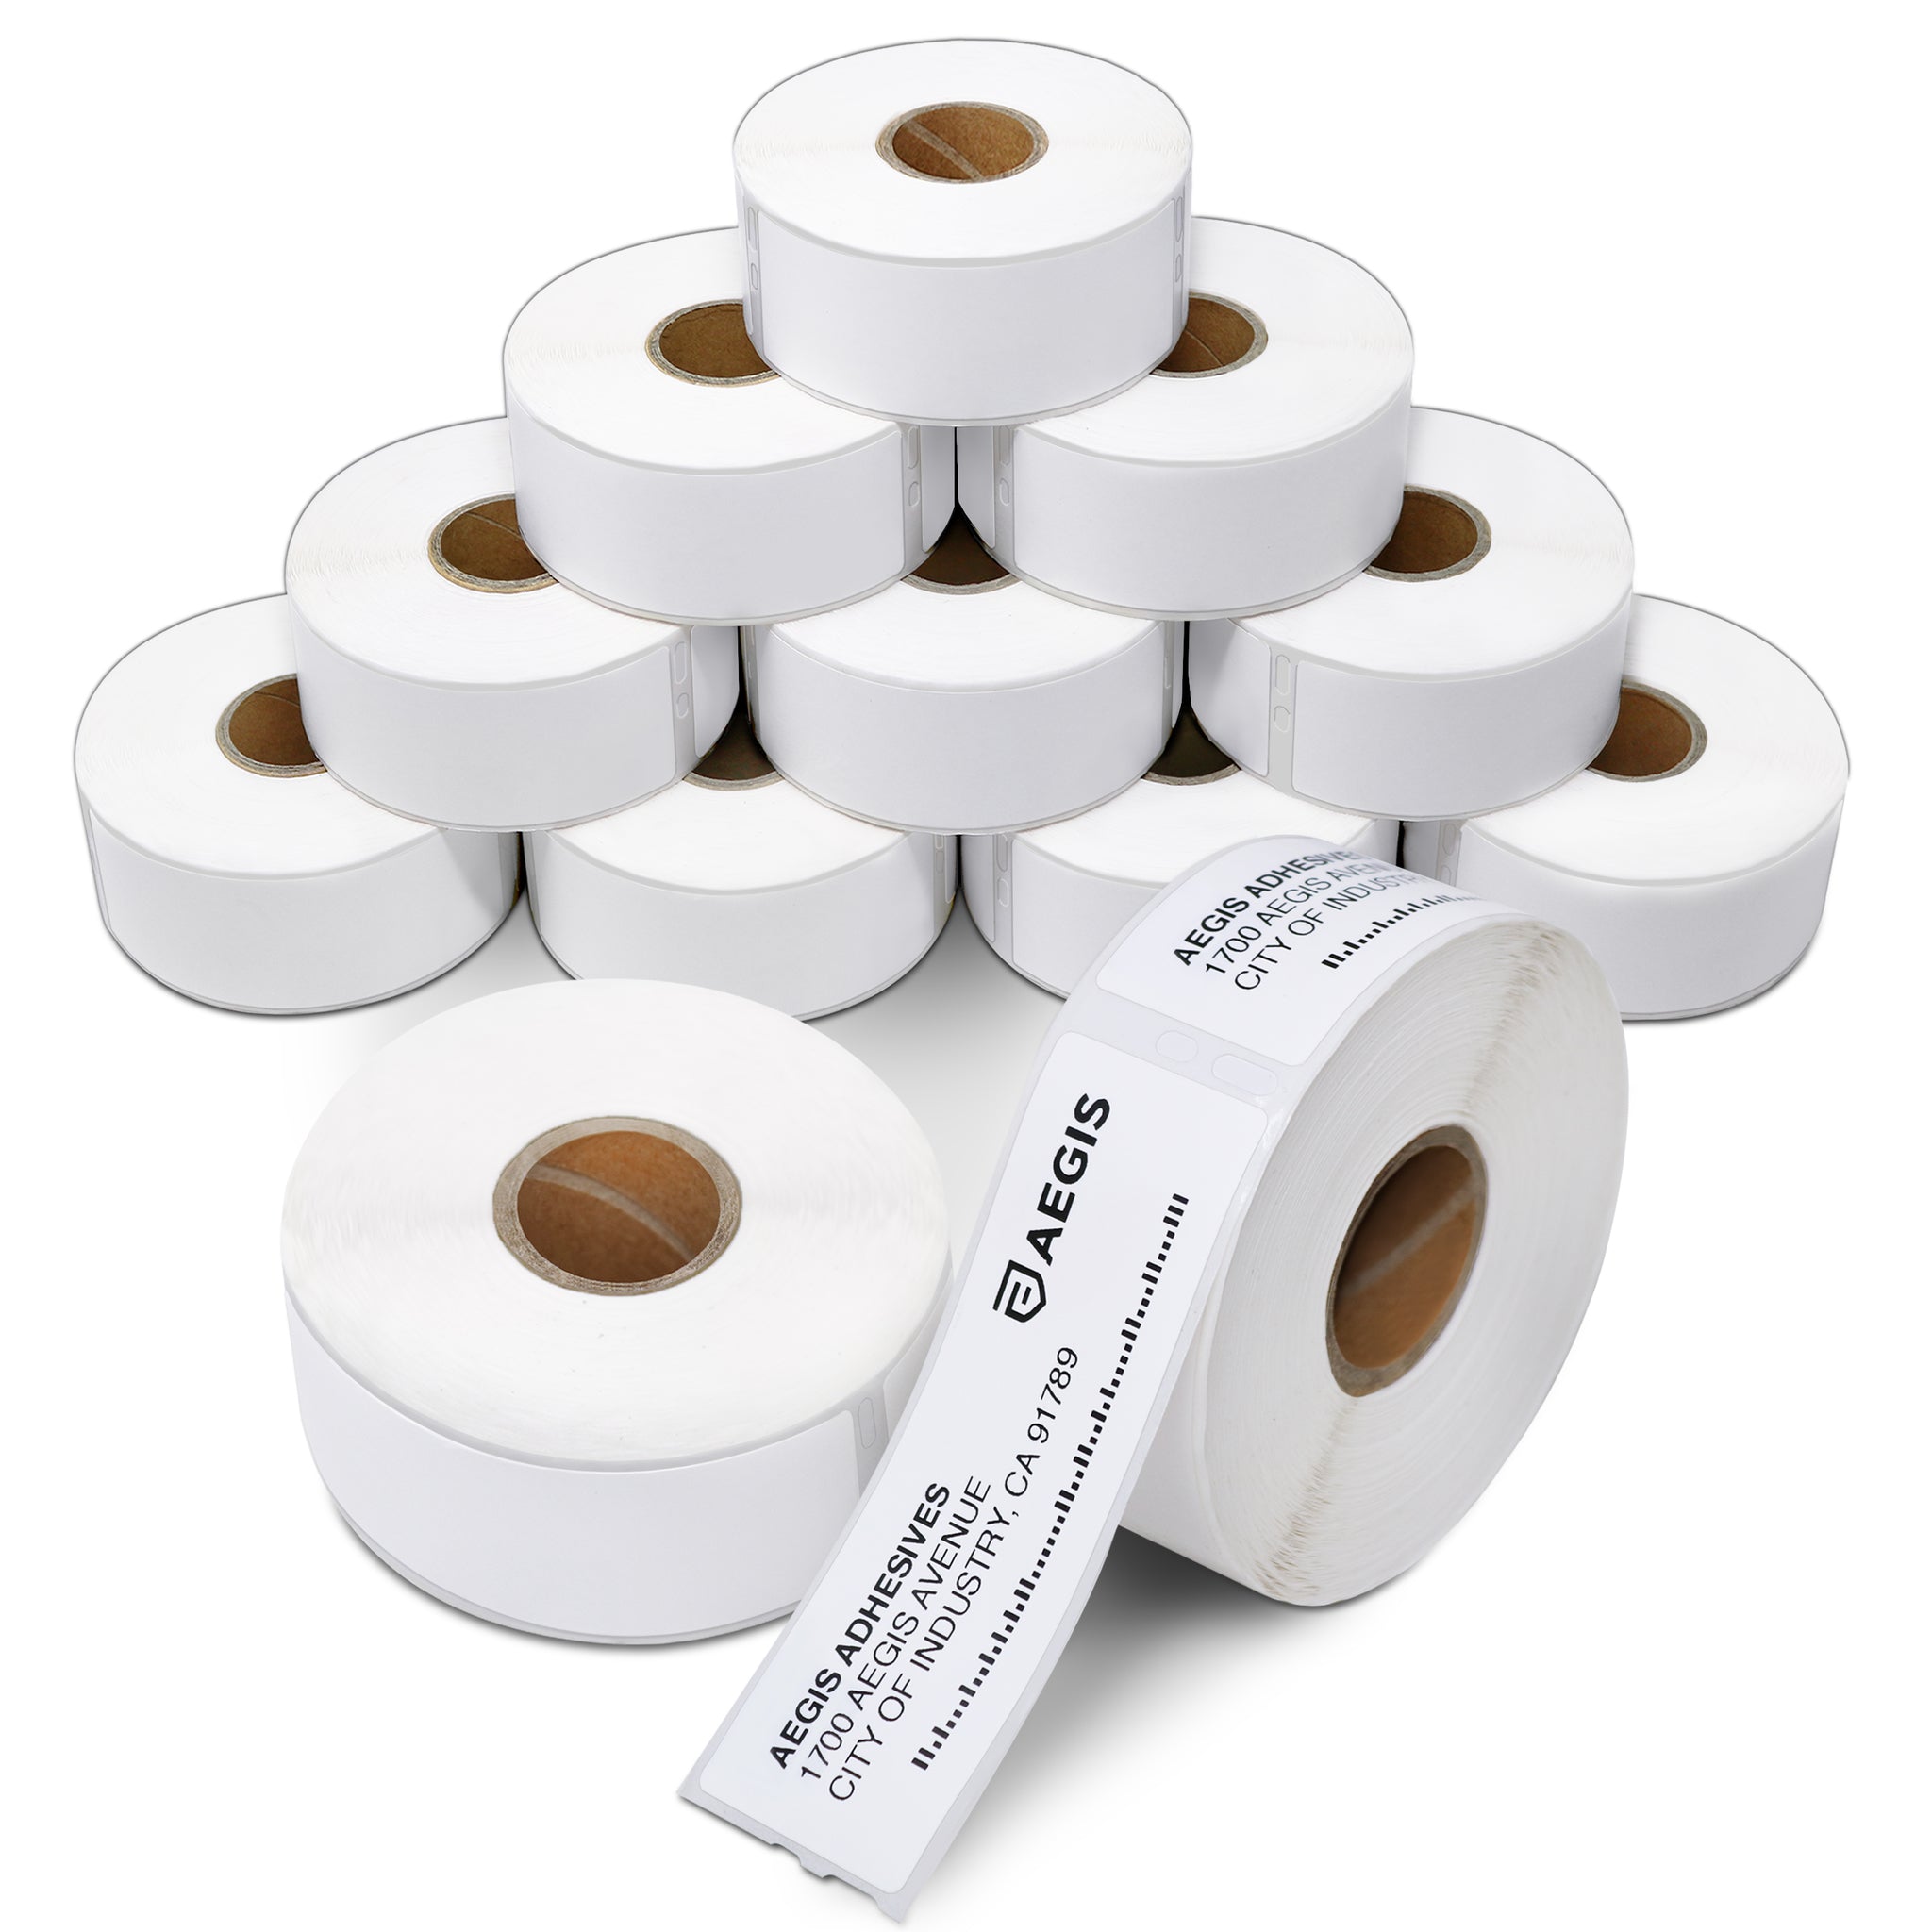 Betckey Dymo 30252 Compatible Address Labels 1-1/8 x 3-1/2